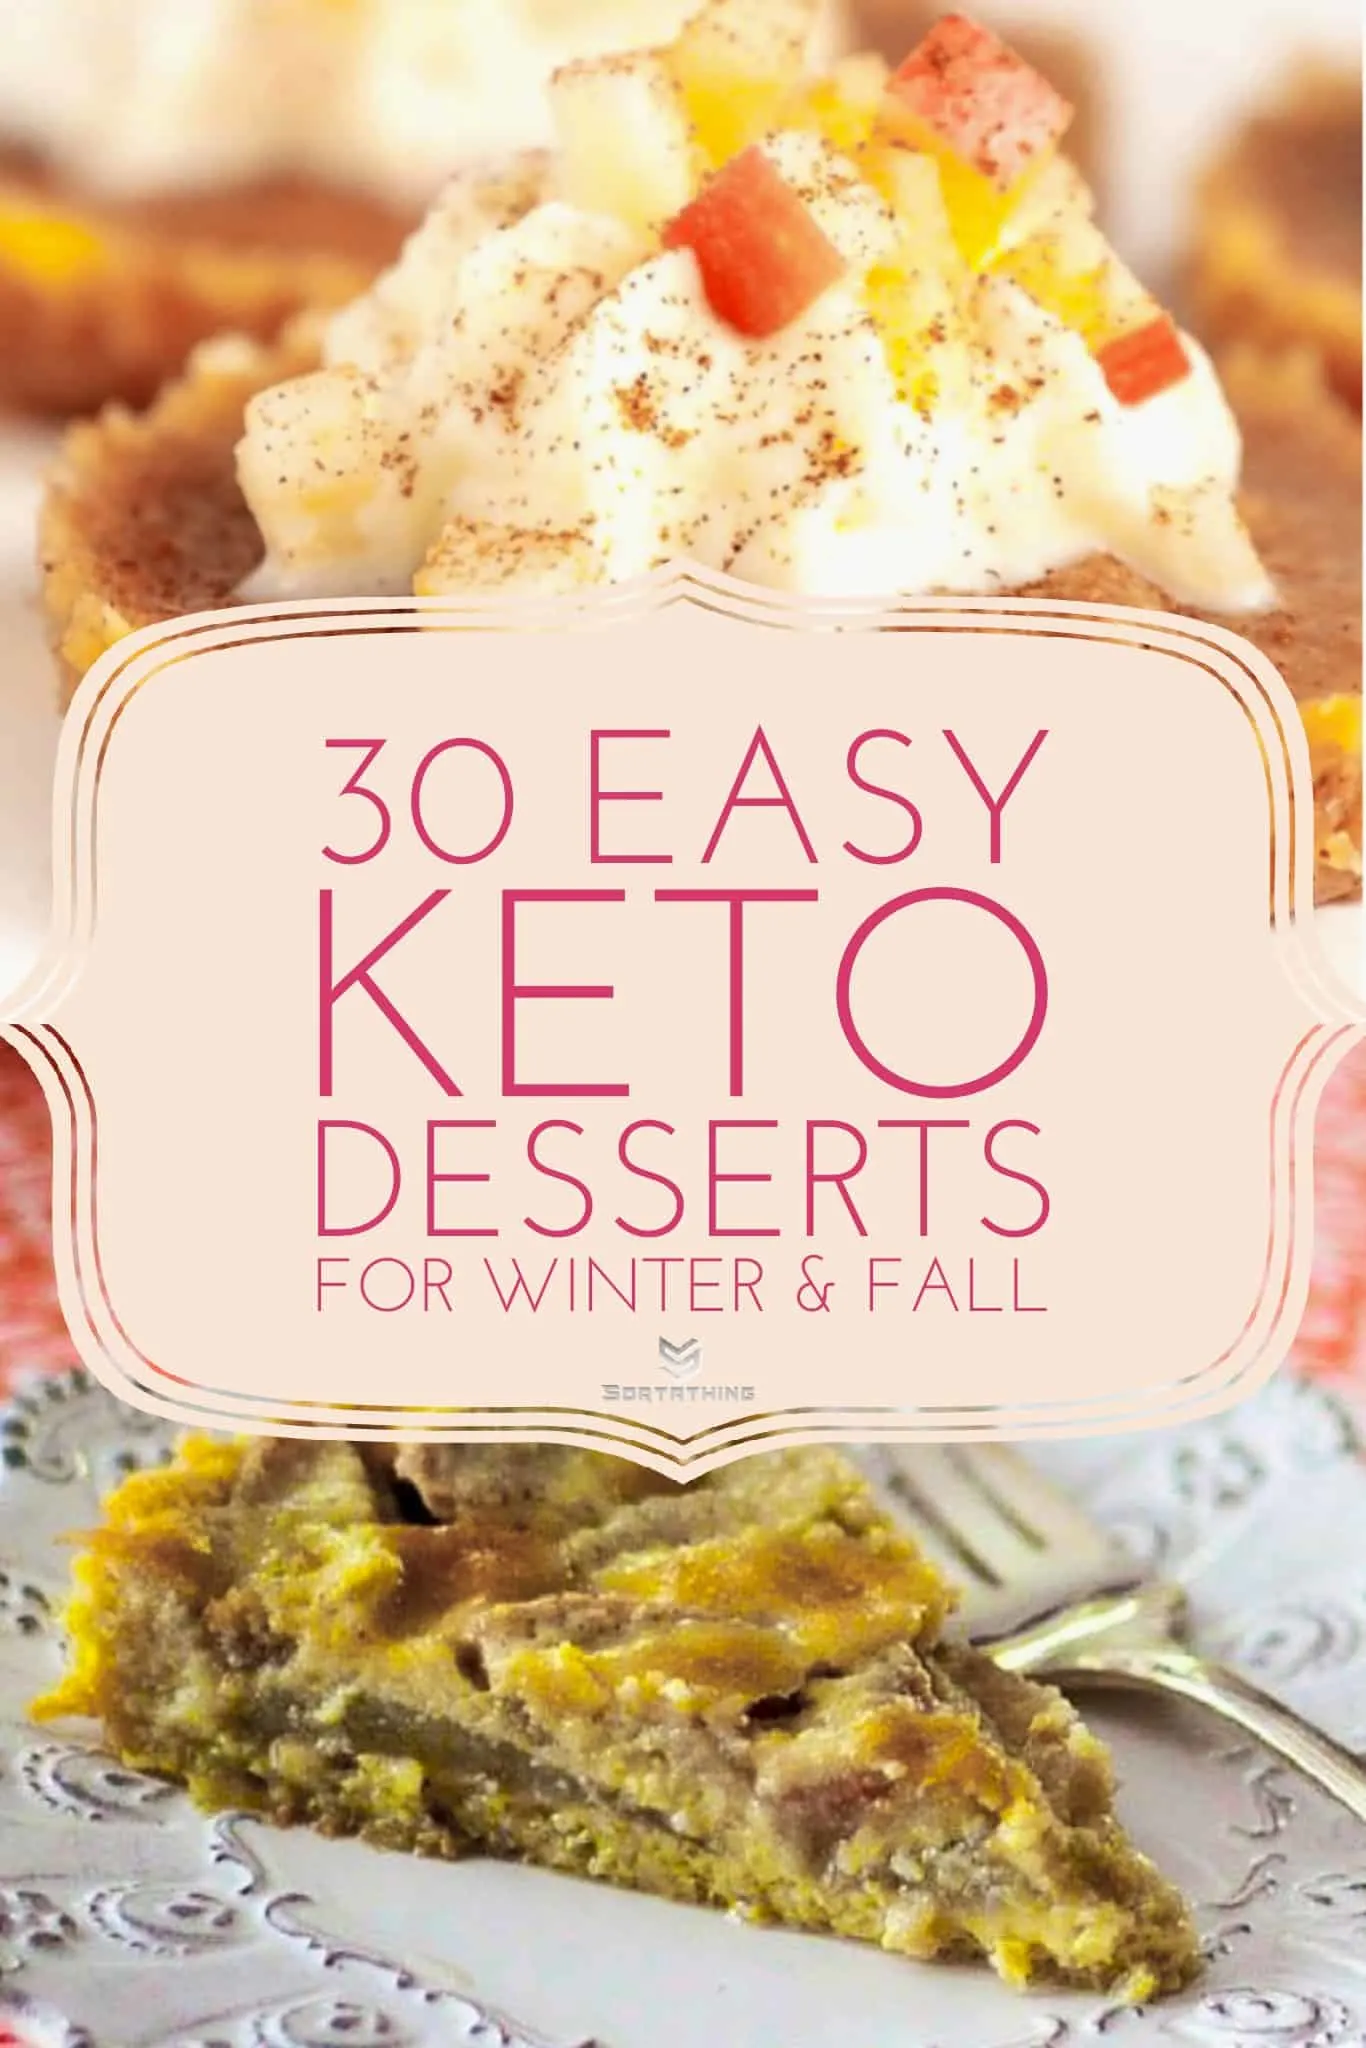 Keto Apple Pie Fat Bombs and Low-Carb Pear Custard Pie